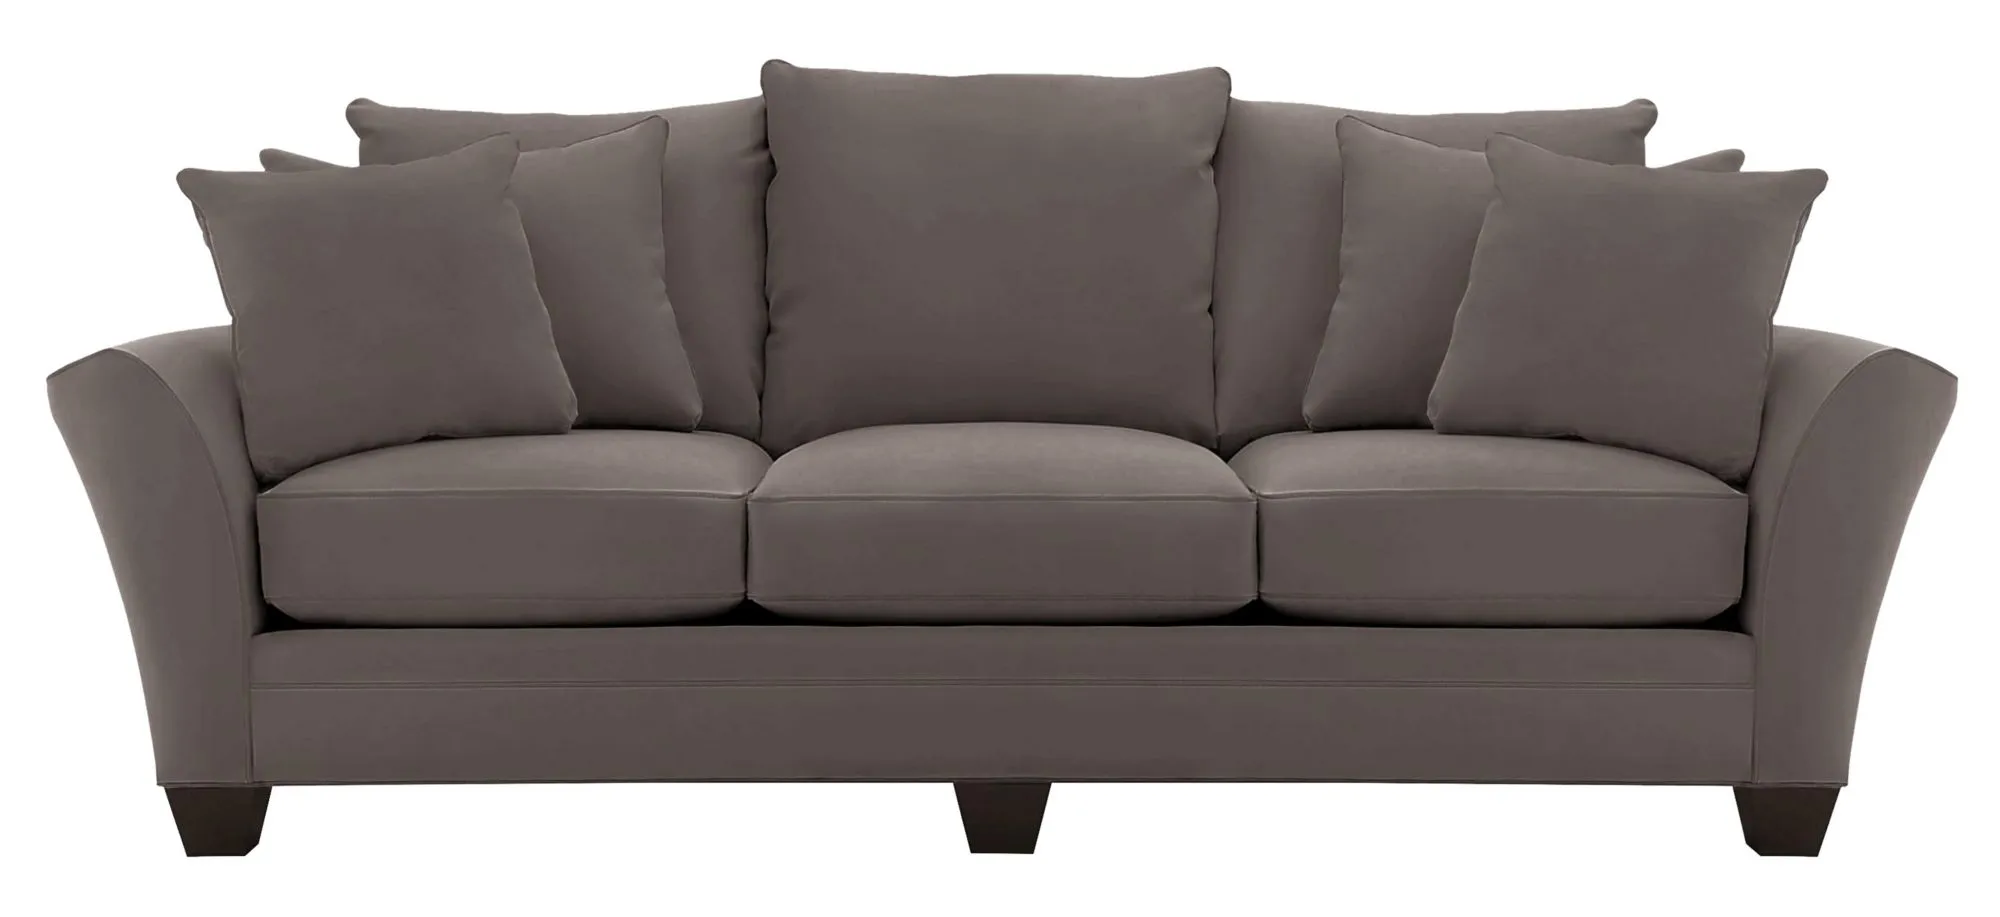 Briarwood Sofa in Suede So Soft Slate by H.M. Richards